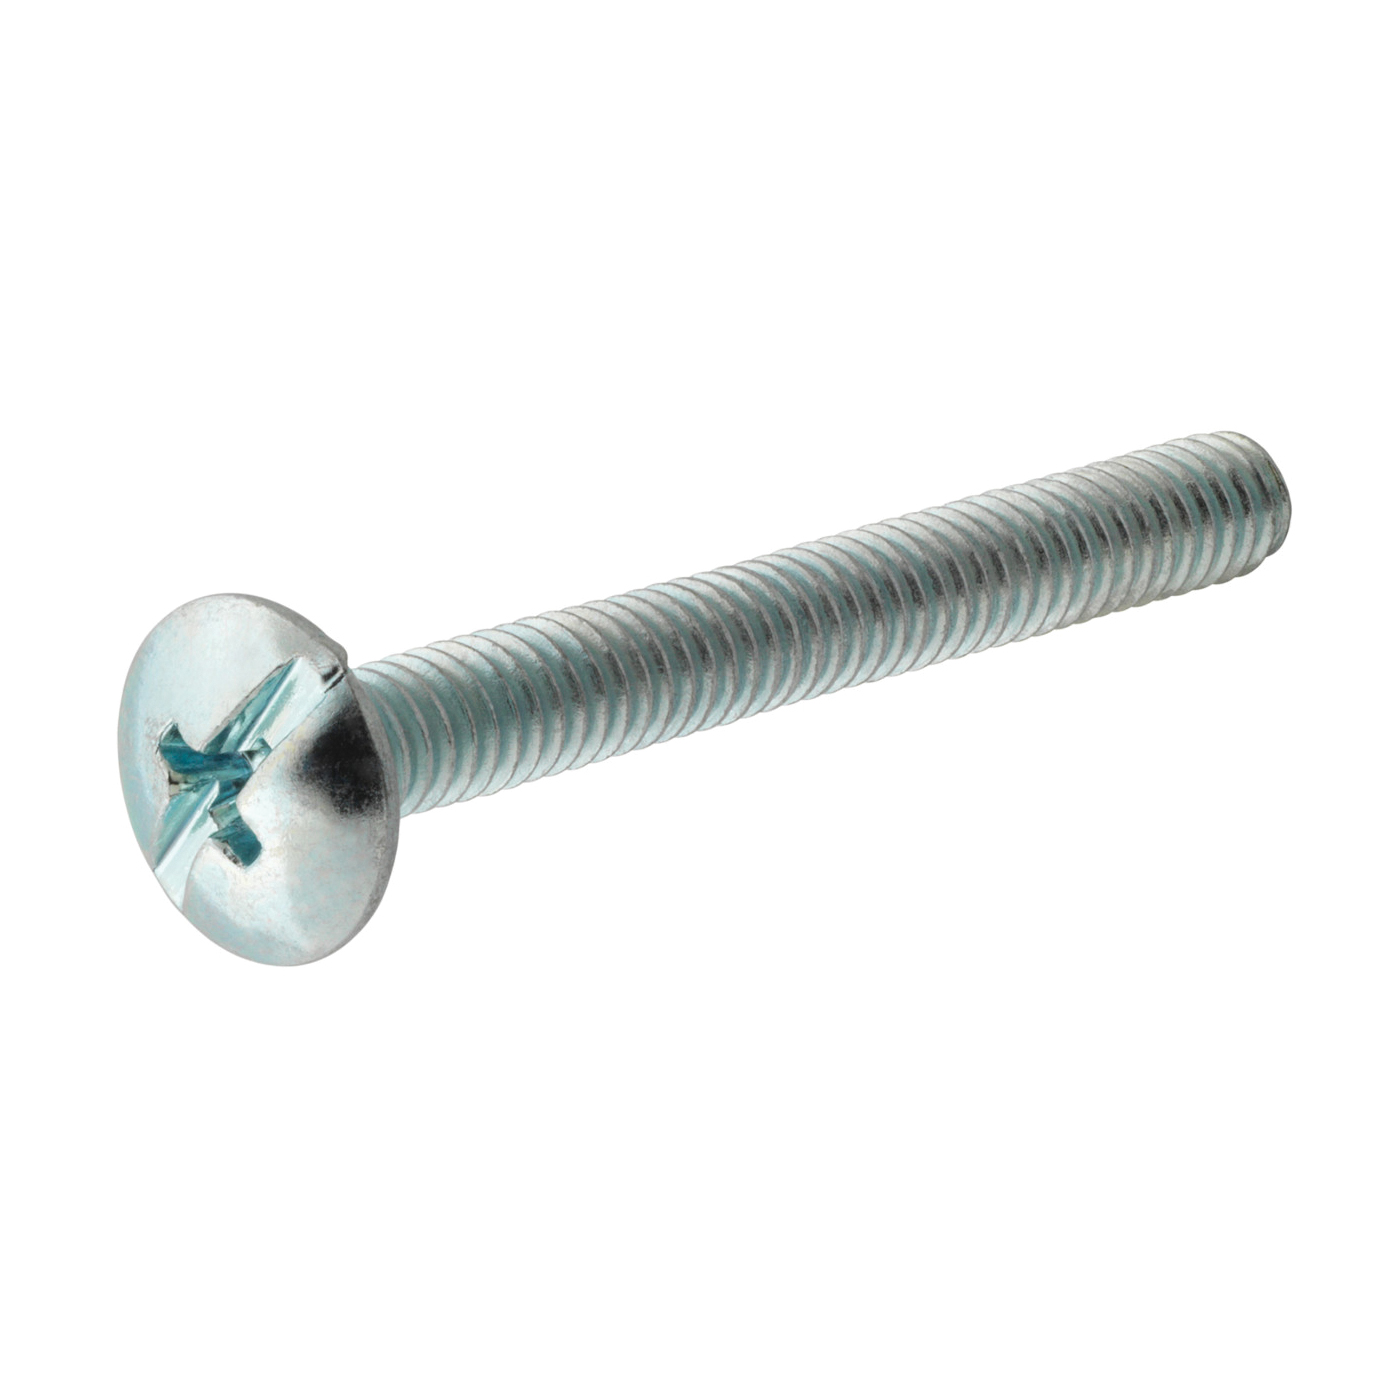 881044 Machine Screw, #8-32 Thread, 3/4 in L, Truss Head, Phillips, Slotted Drive, Stainless Steel